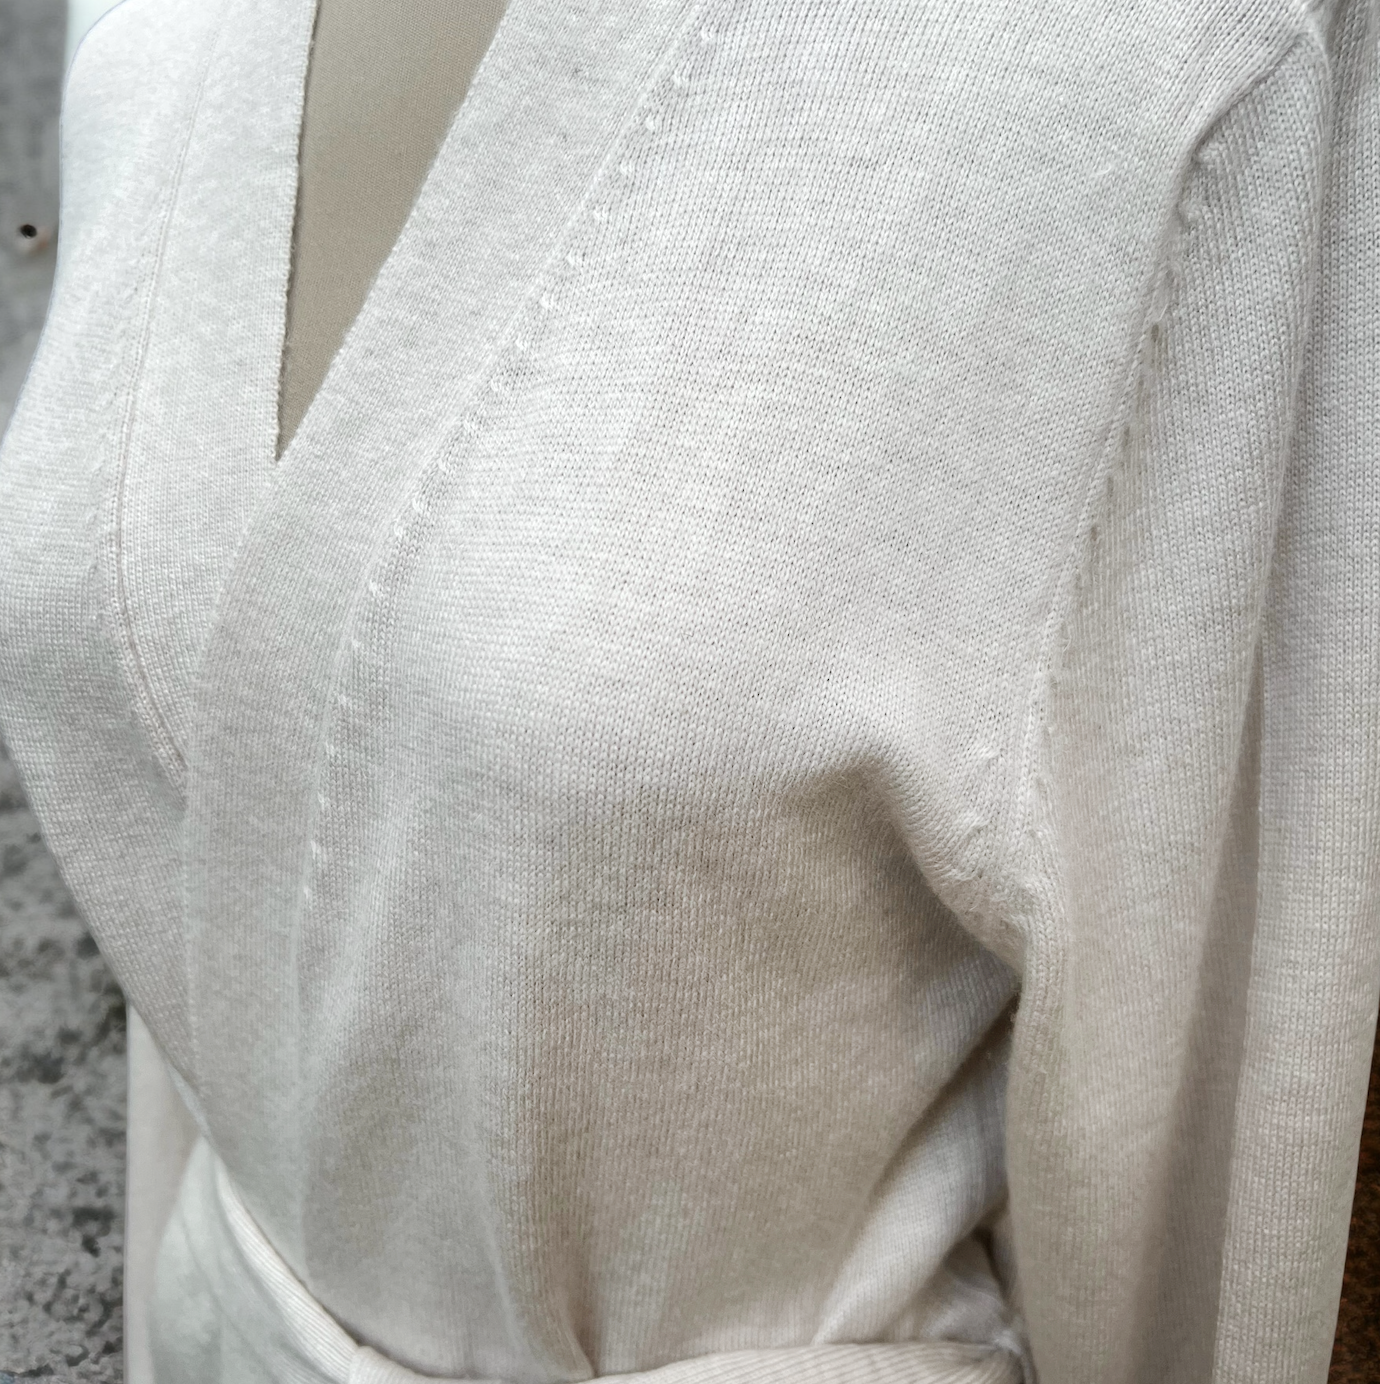 100% Cashmere robes from Nepal